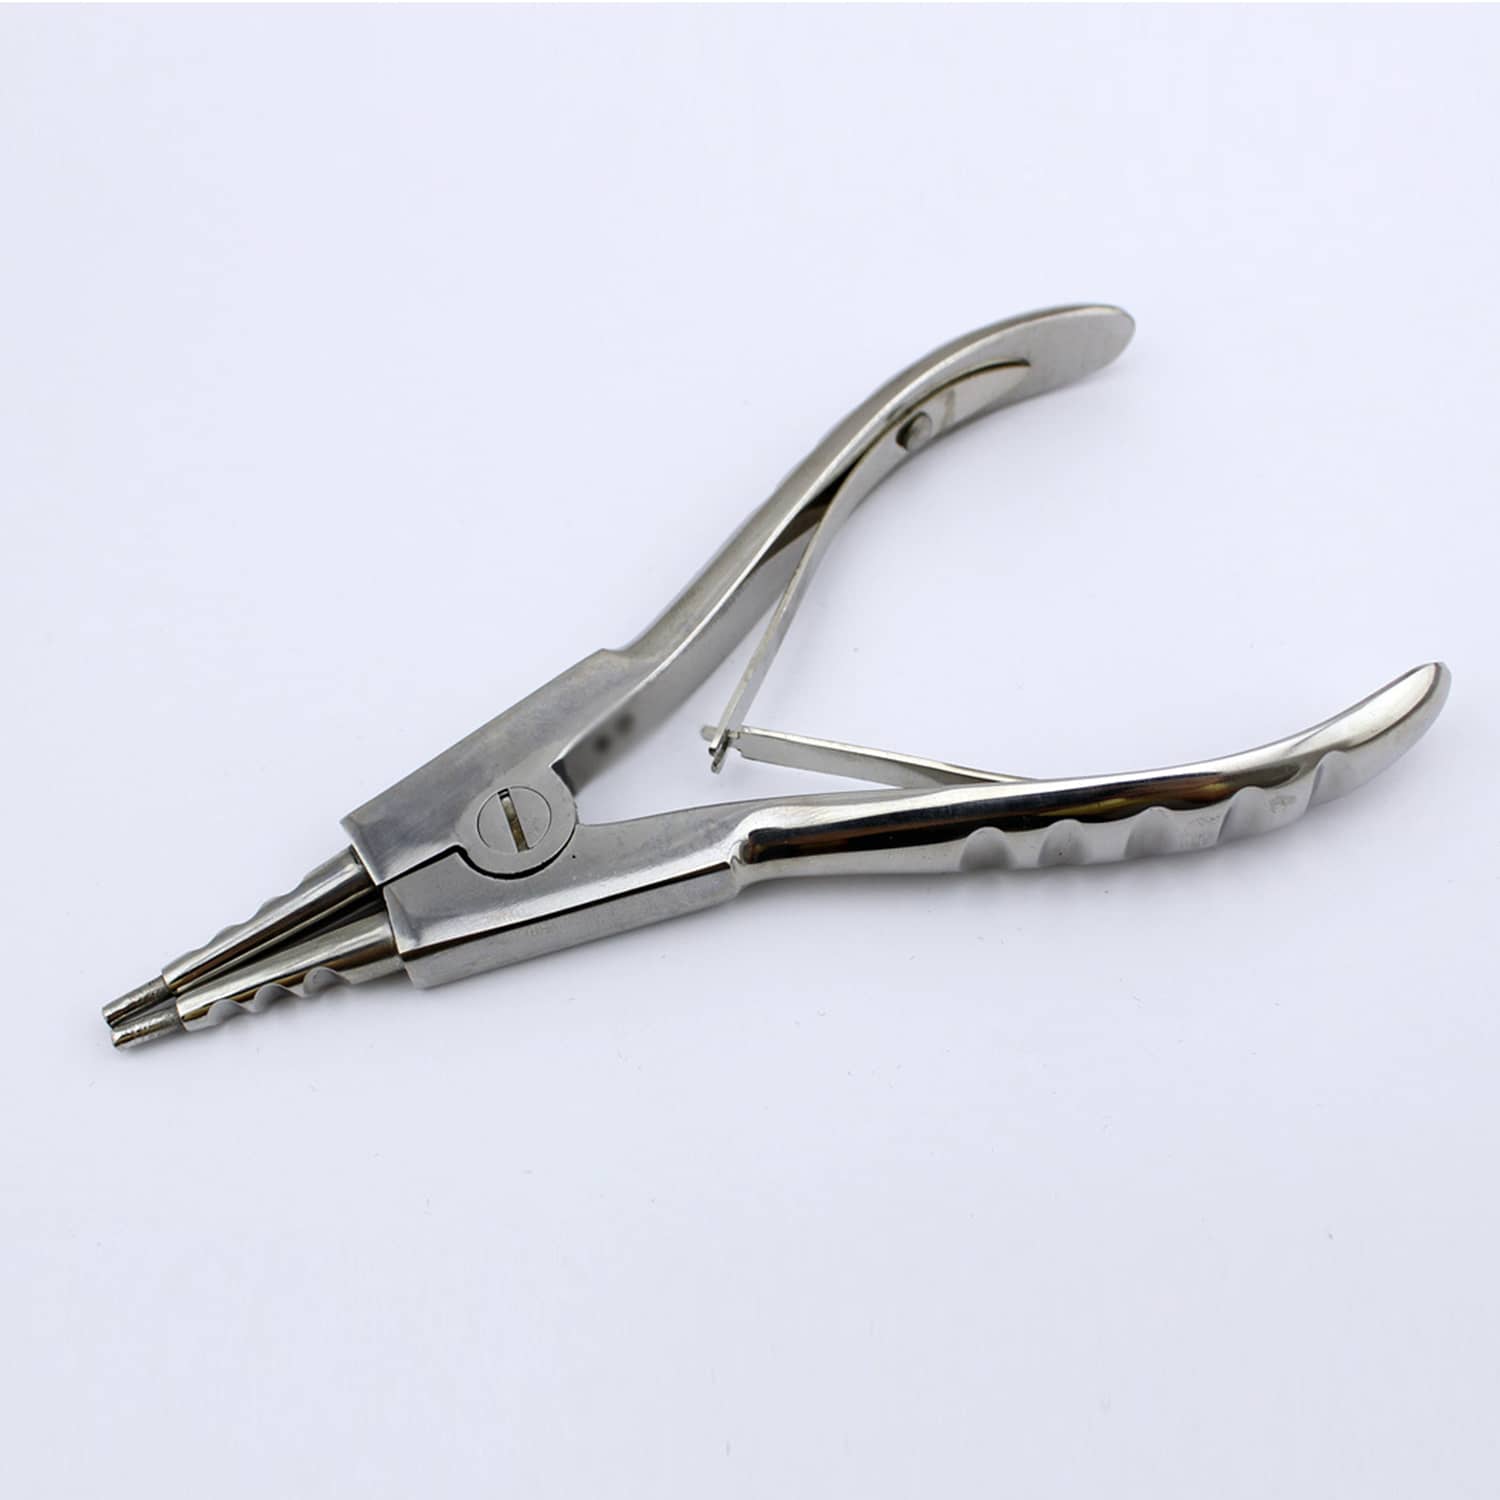 Small Ring Opening Pliers - LionGothic Body Piercing Jewelry Tools